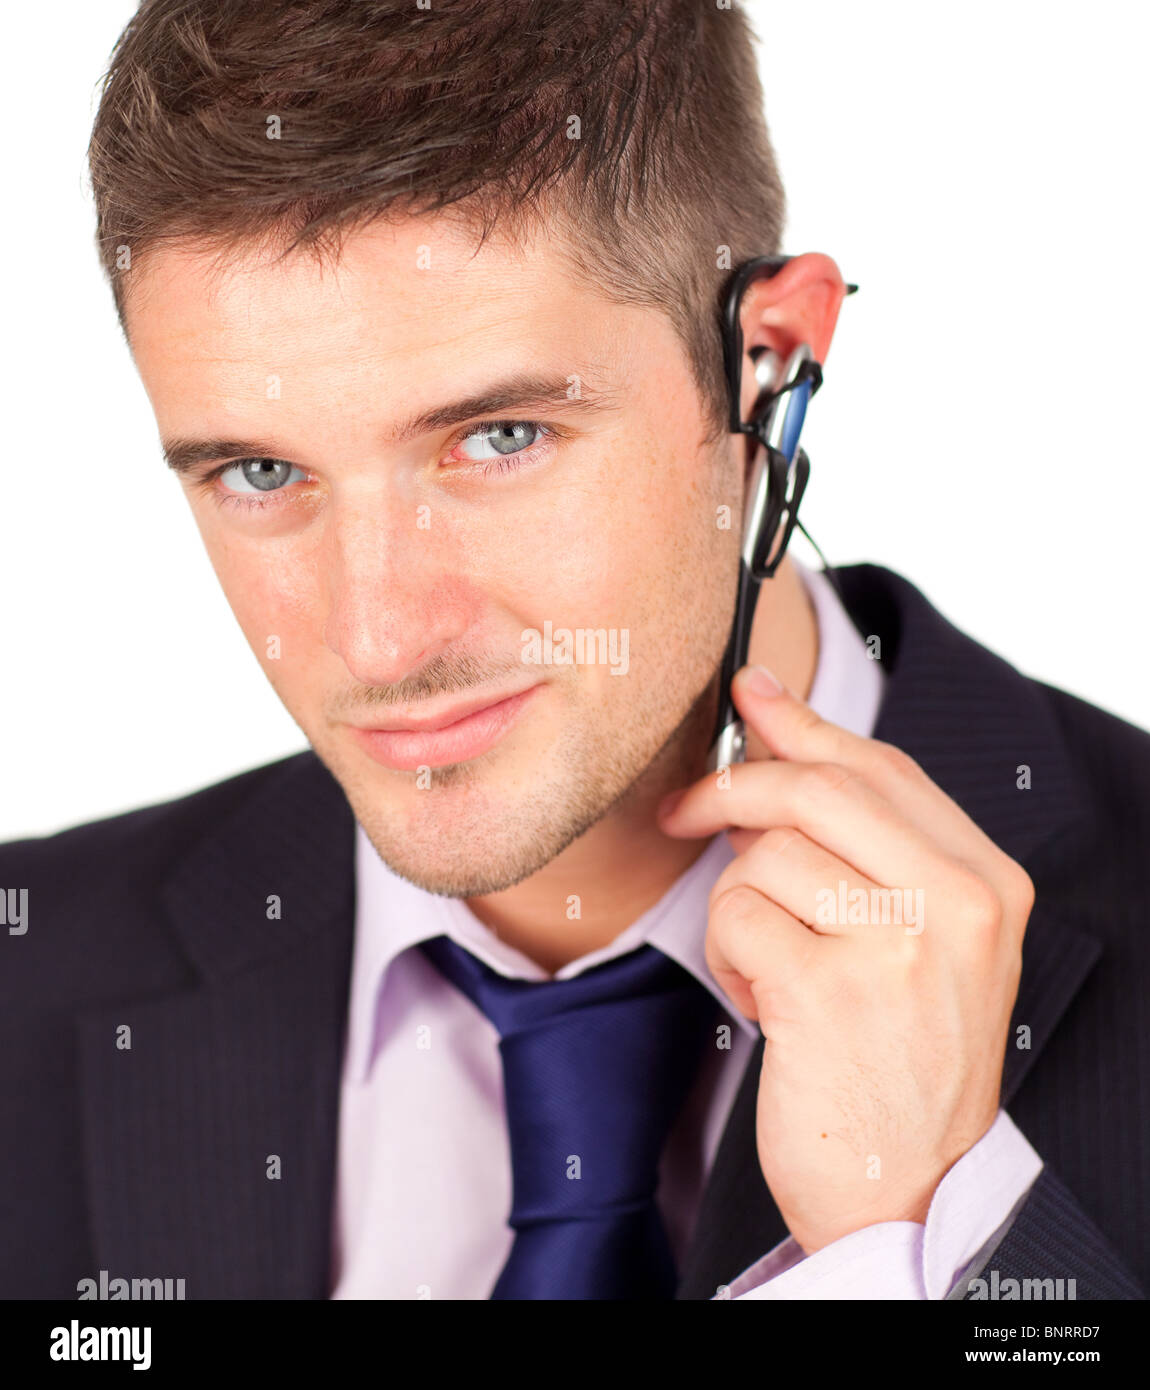 Attractive Young Professional looking at the camera Stock Photo